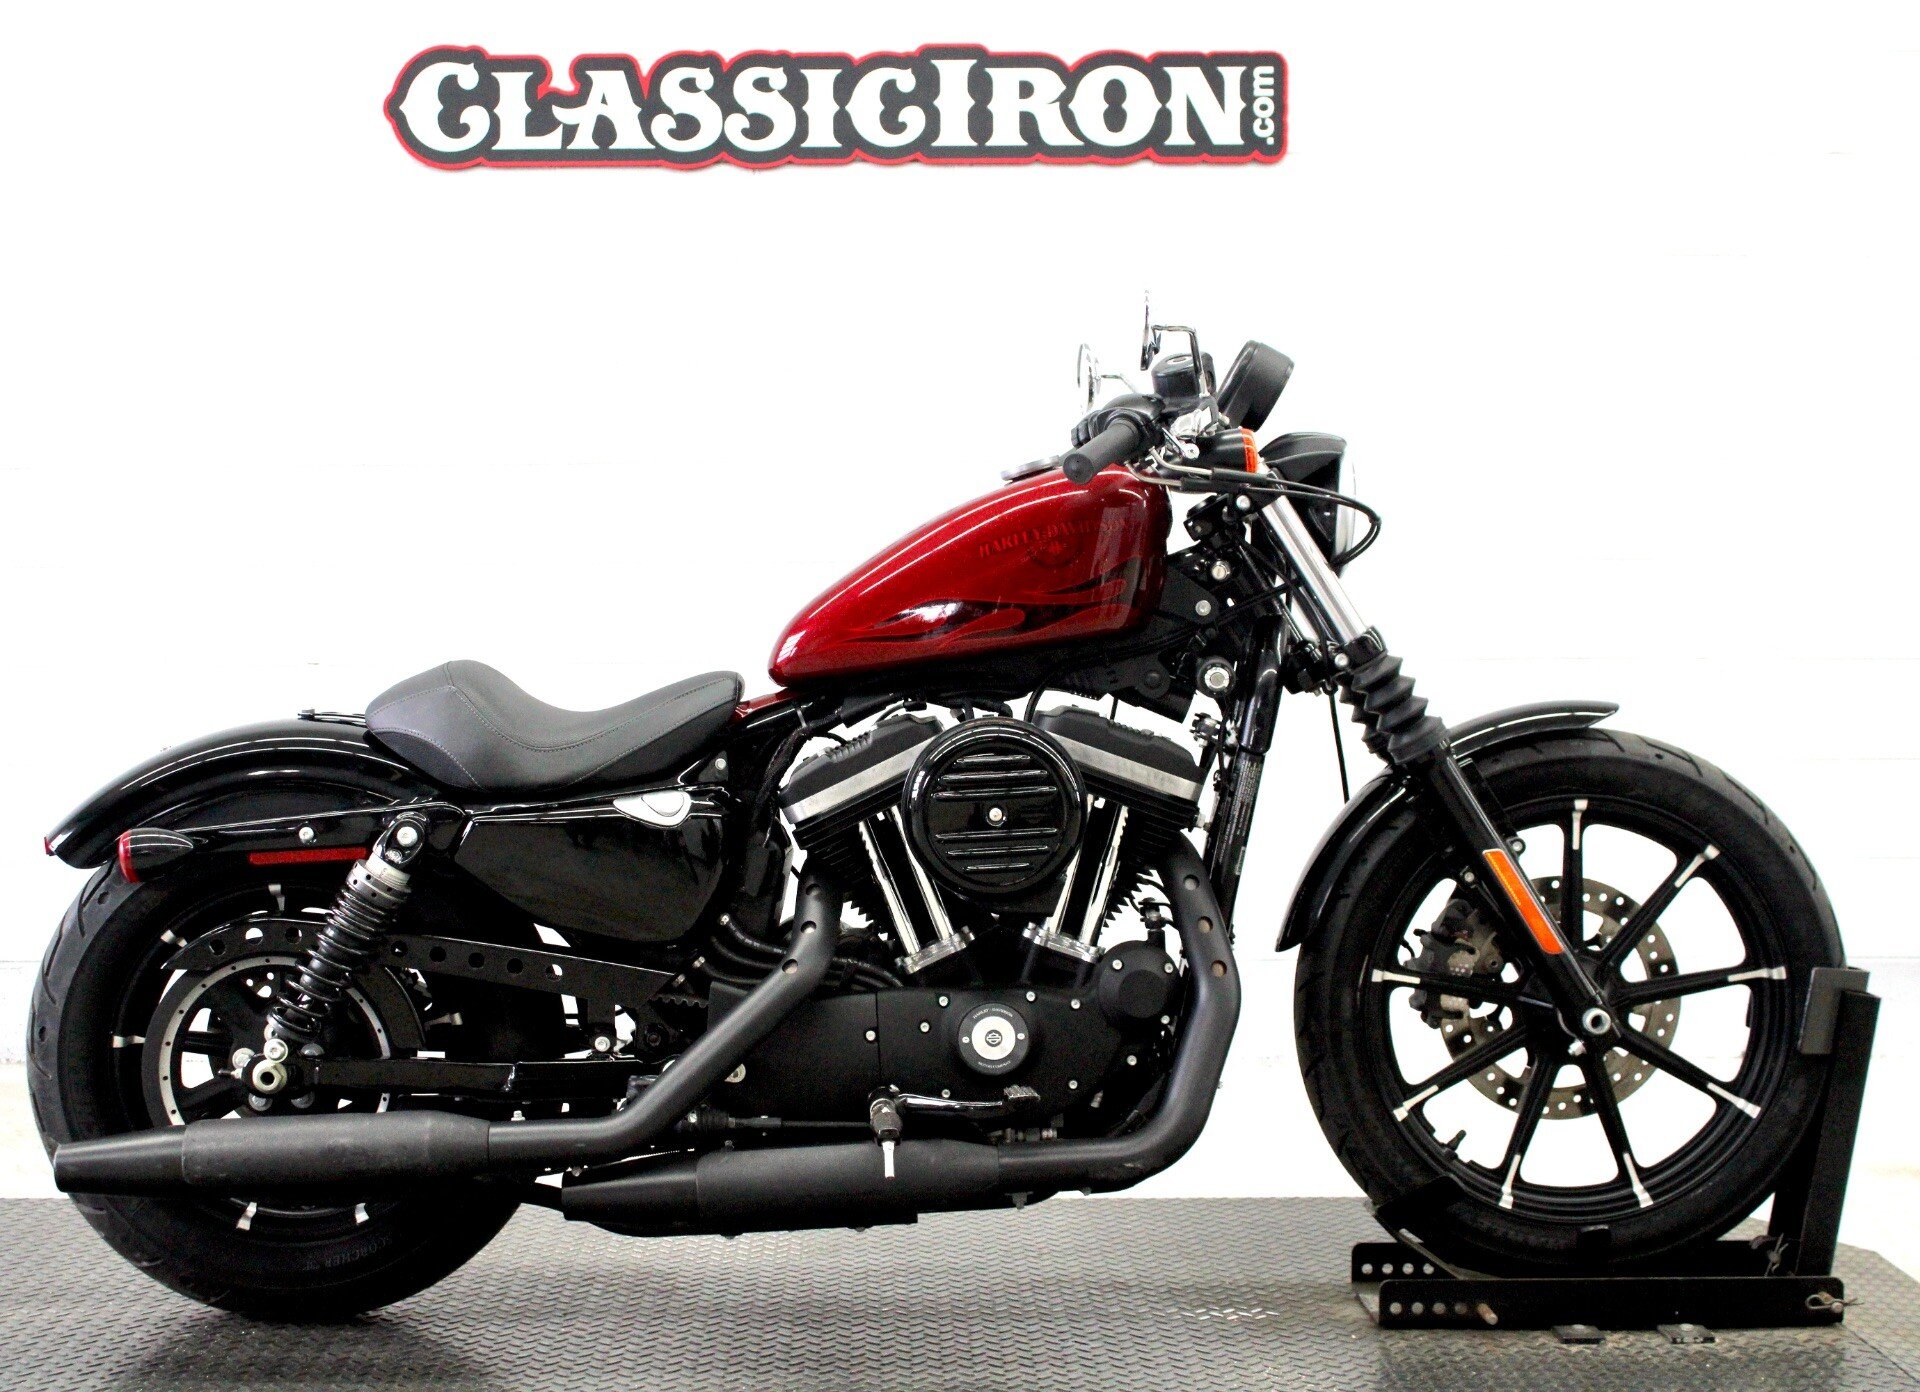 2017 Harley-Davidson Sportster Motorcycles for Sale near Tampa